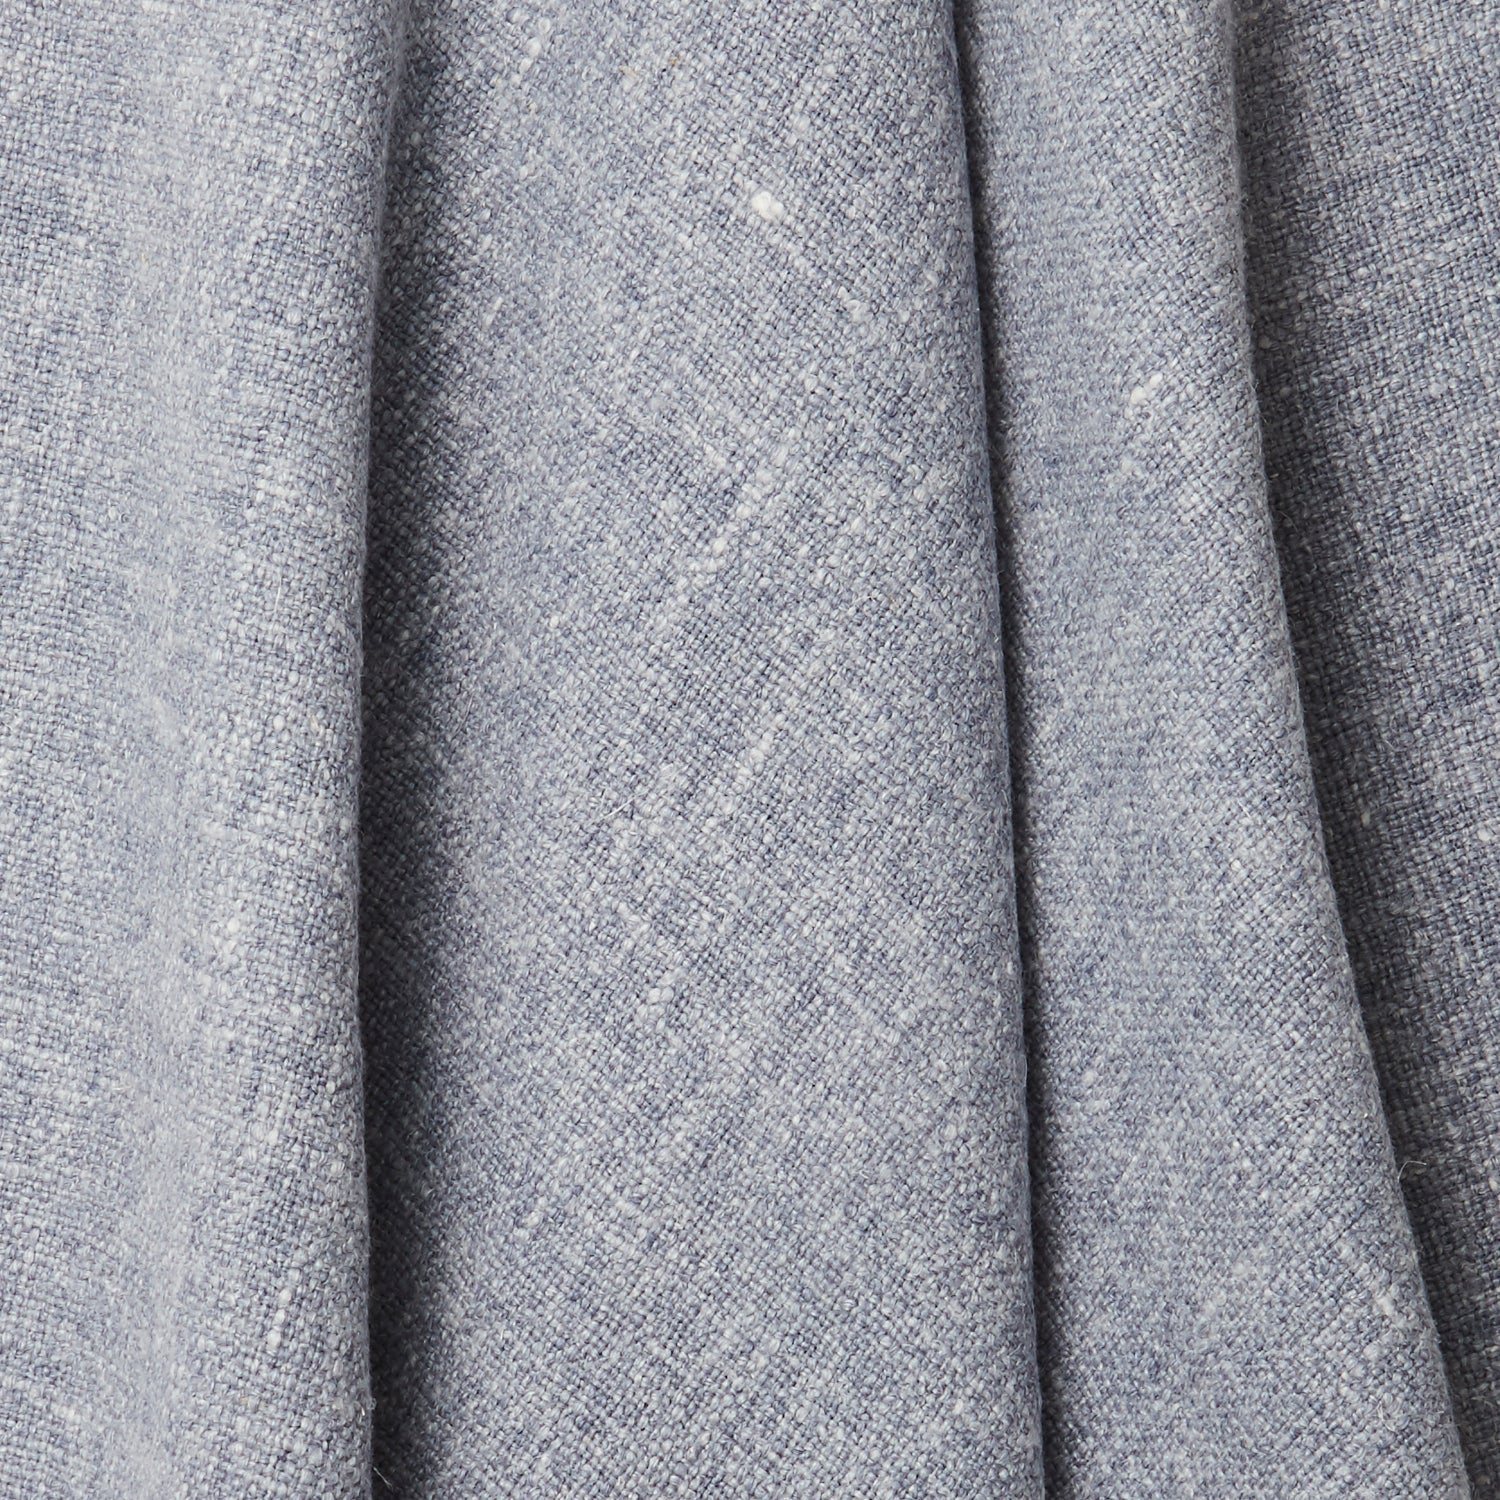 A draped swatch of blended linen fabric in a mottled light navy color.